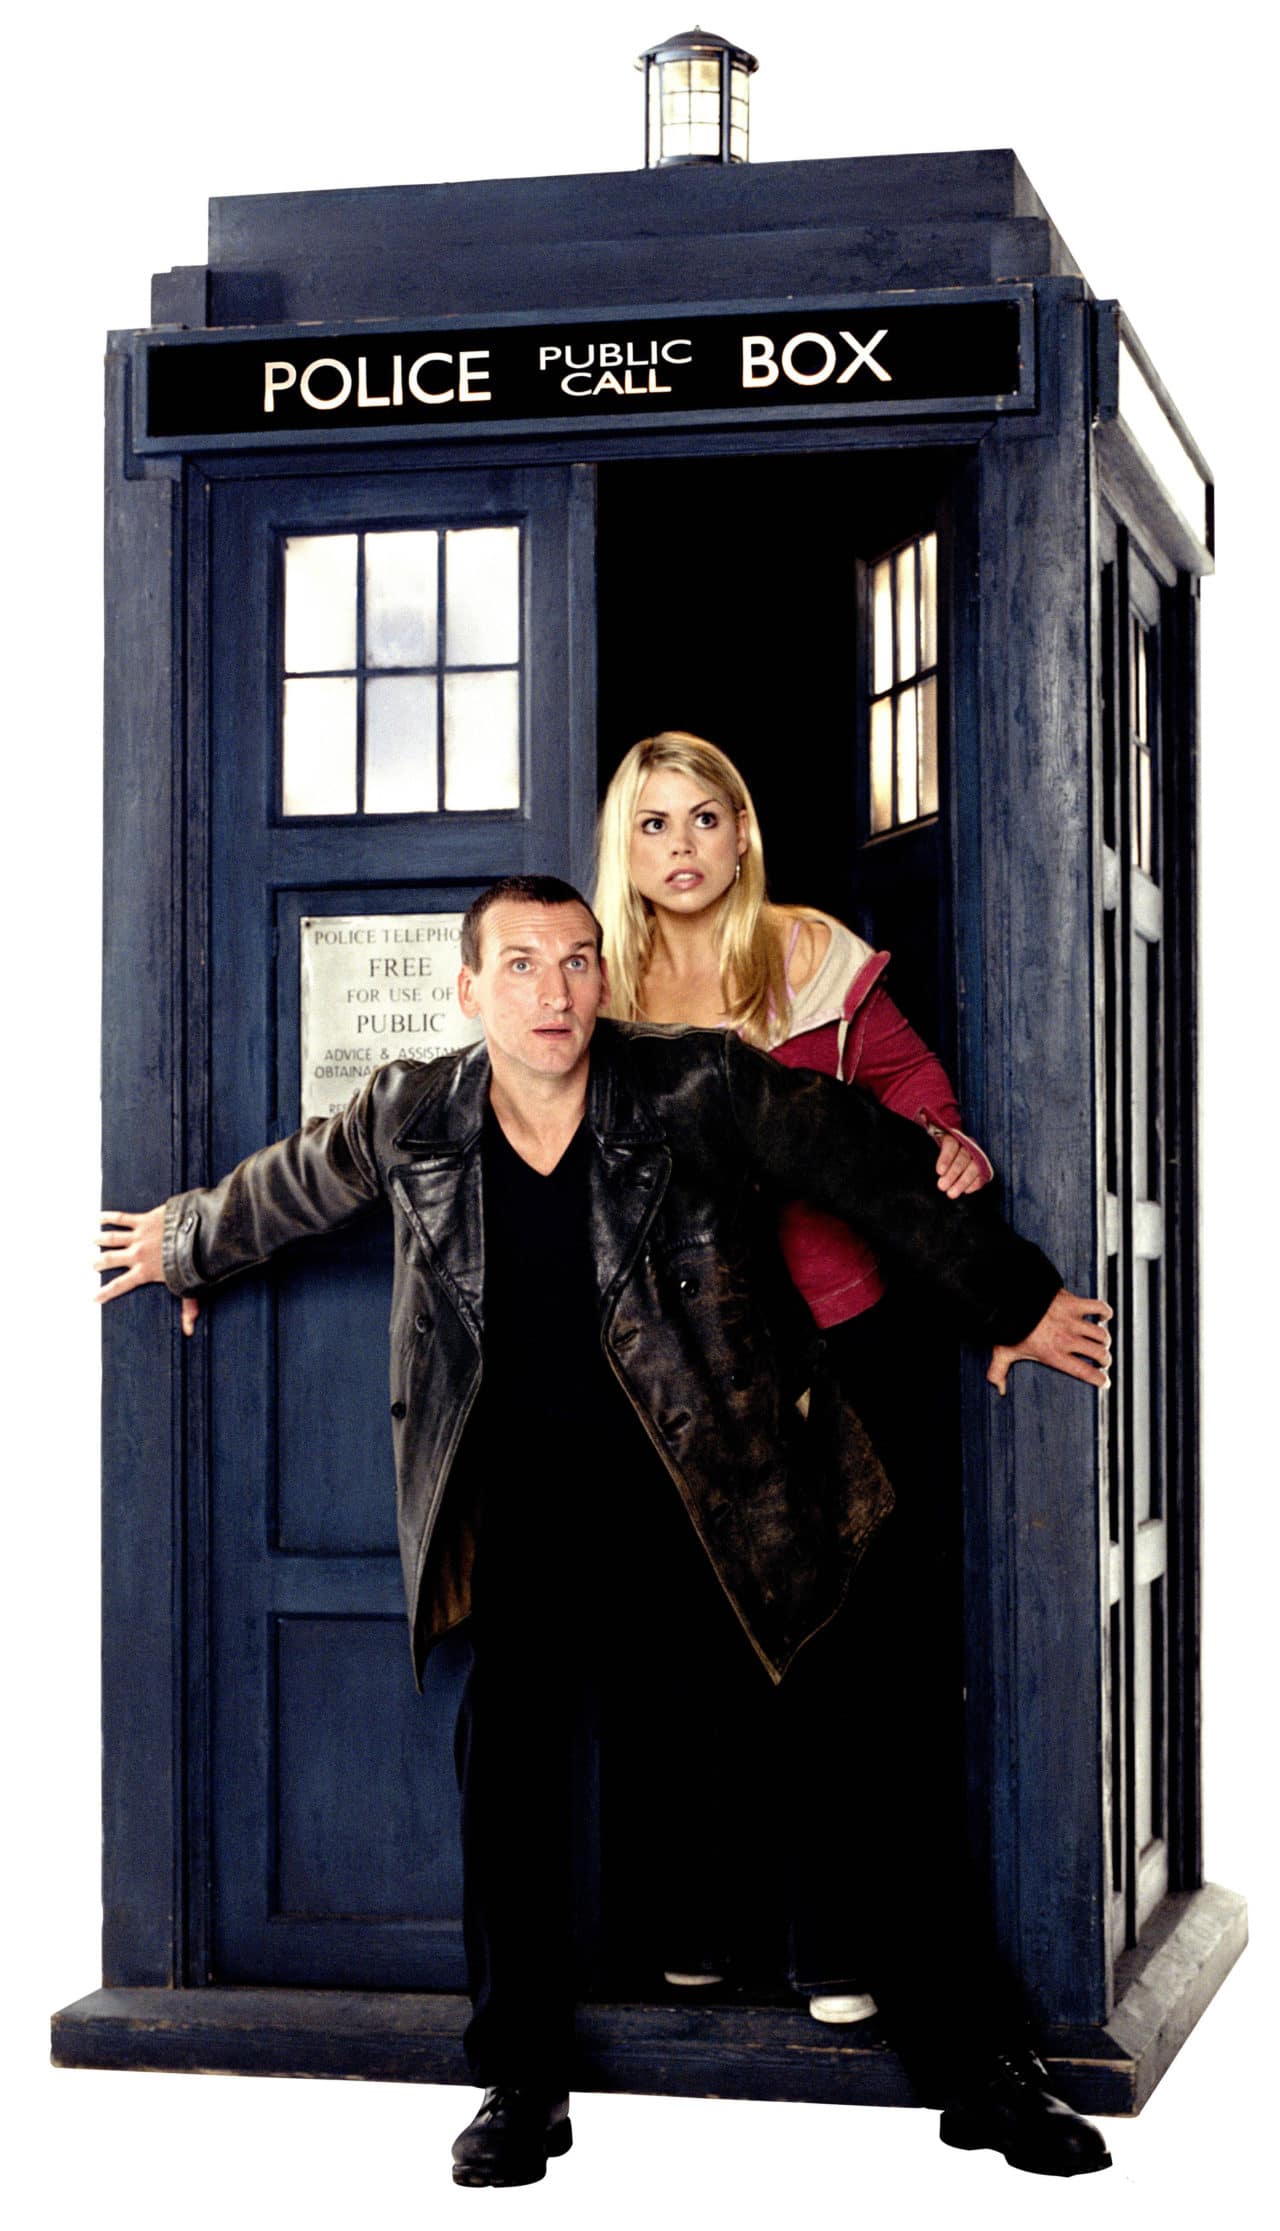 Rose Tyler (Billie Piper) and the 9th Doctor (Christopher Eccleston). Photo: BBC